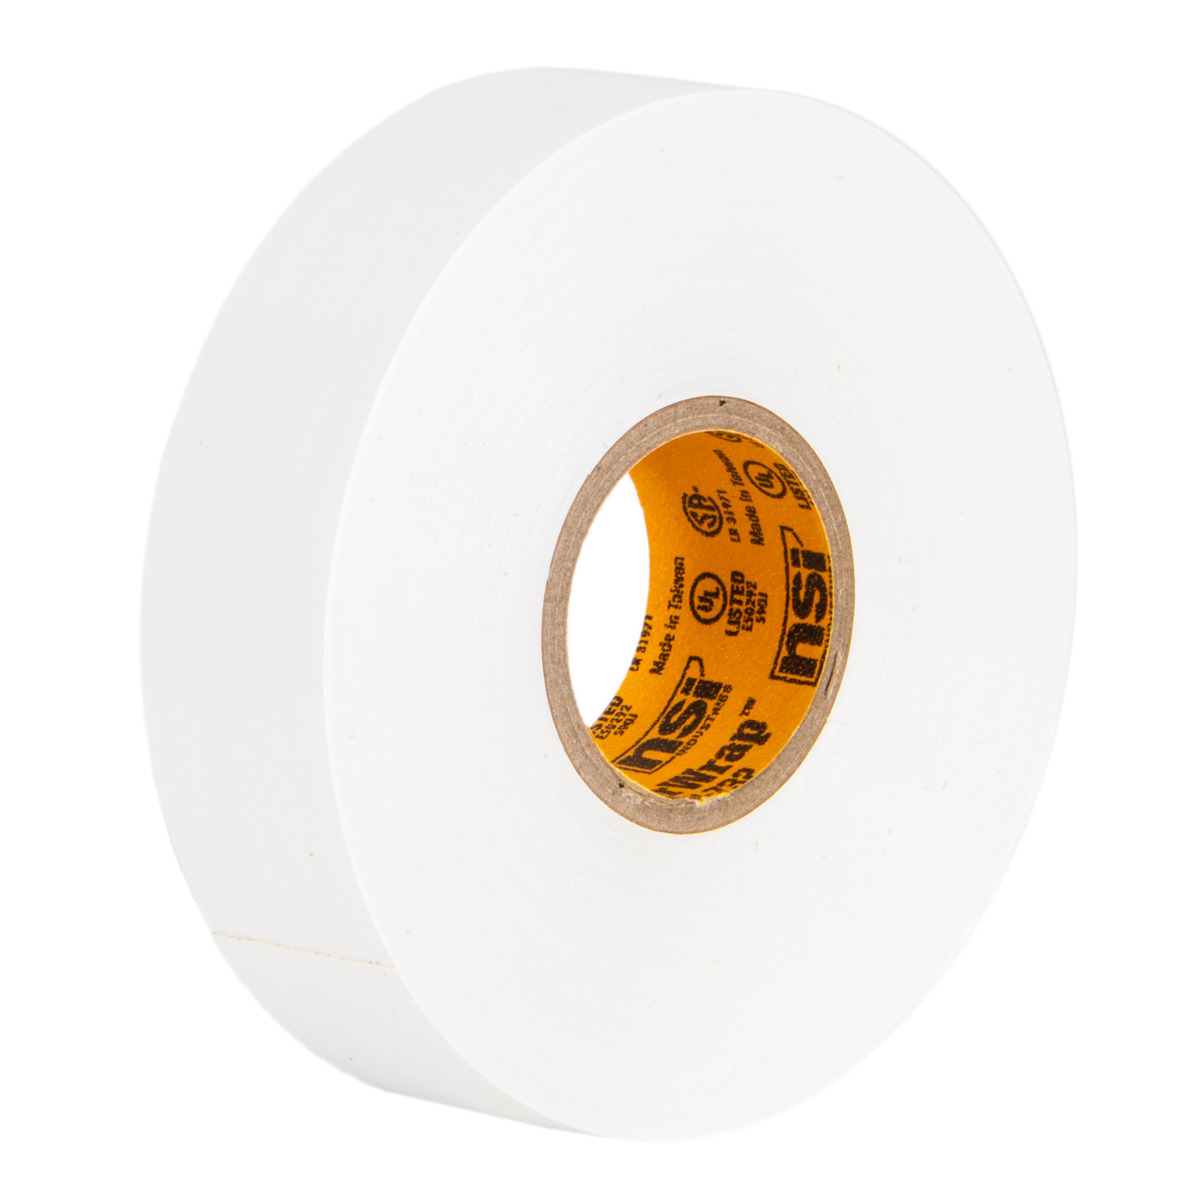 Scotch 0.75-in x 66-ft Vinyl Electrical Tape Black in the